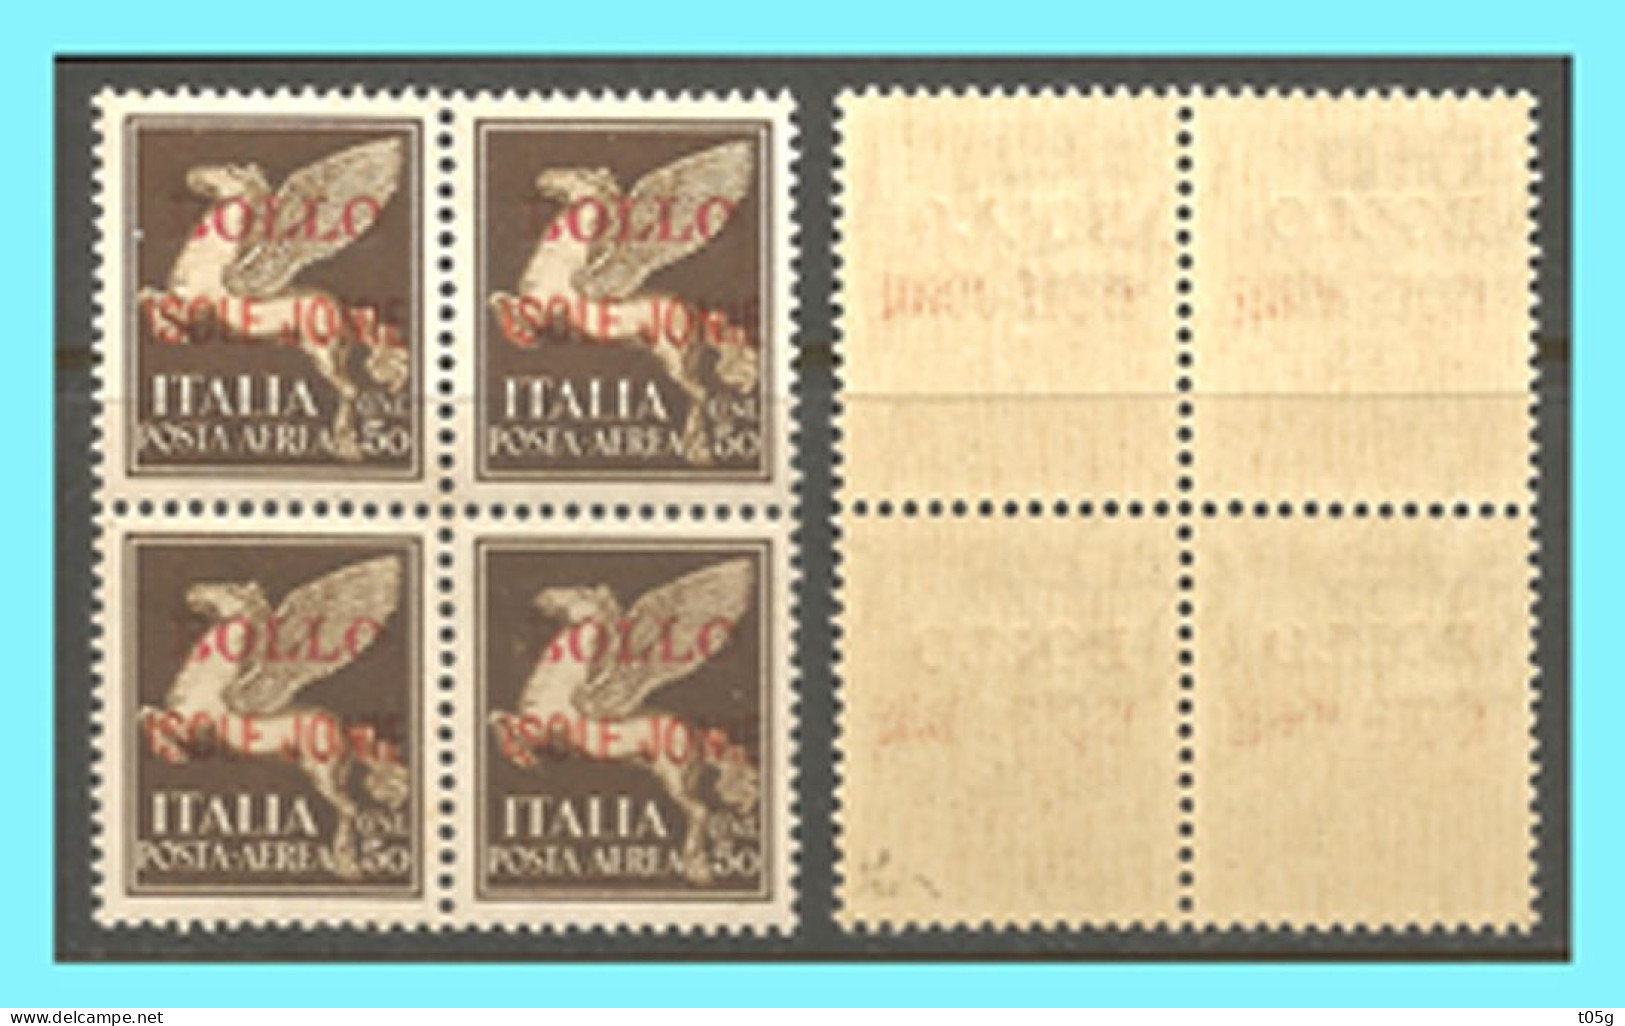 REVENUE: ITALY- GREECE- GRECE- HELLAS 1943 : 50cents  Block /4 "Ionian Islands Italian Occupation" from Set MNH** - Isole Ioniche